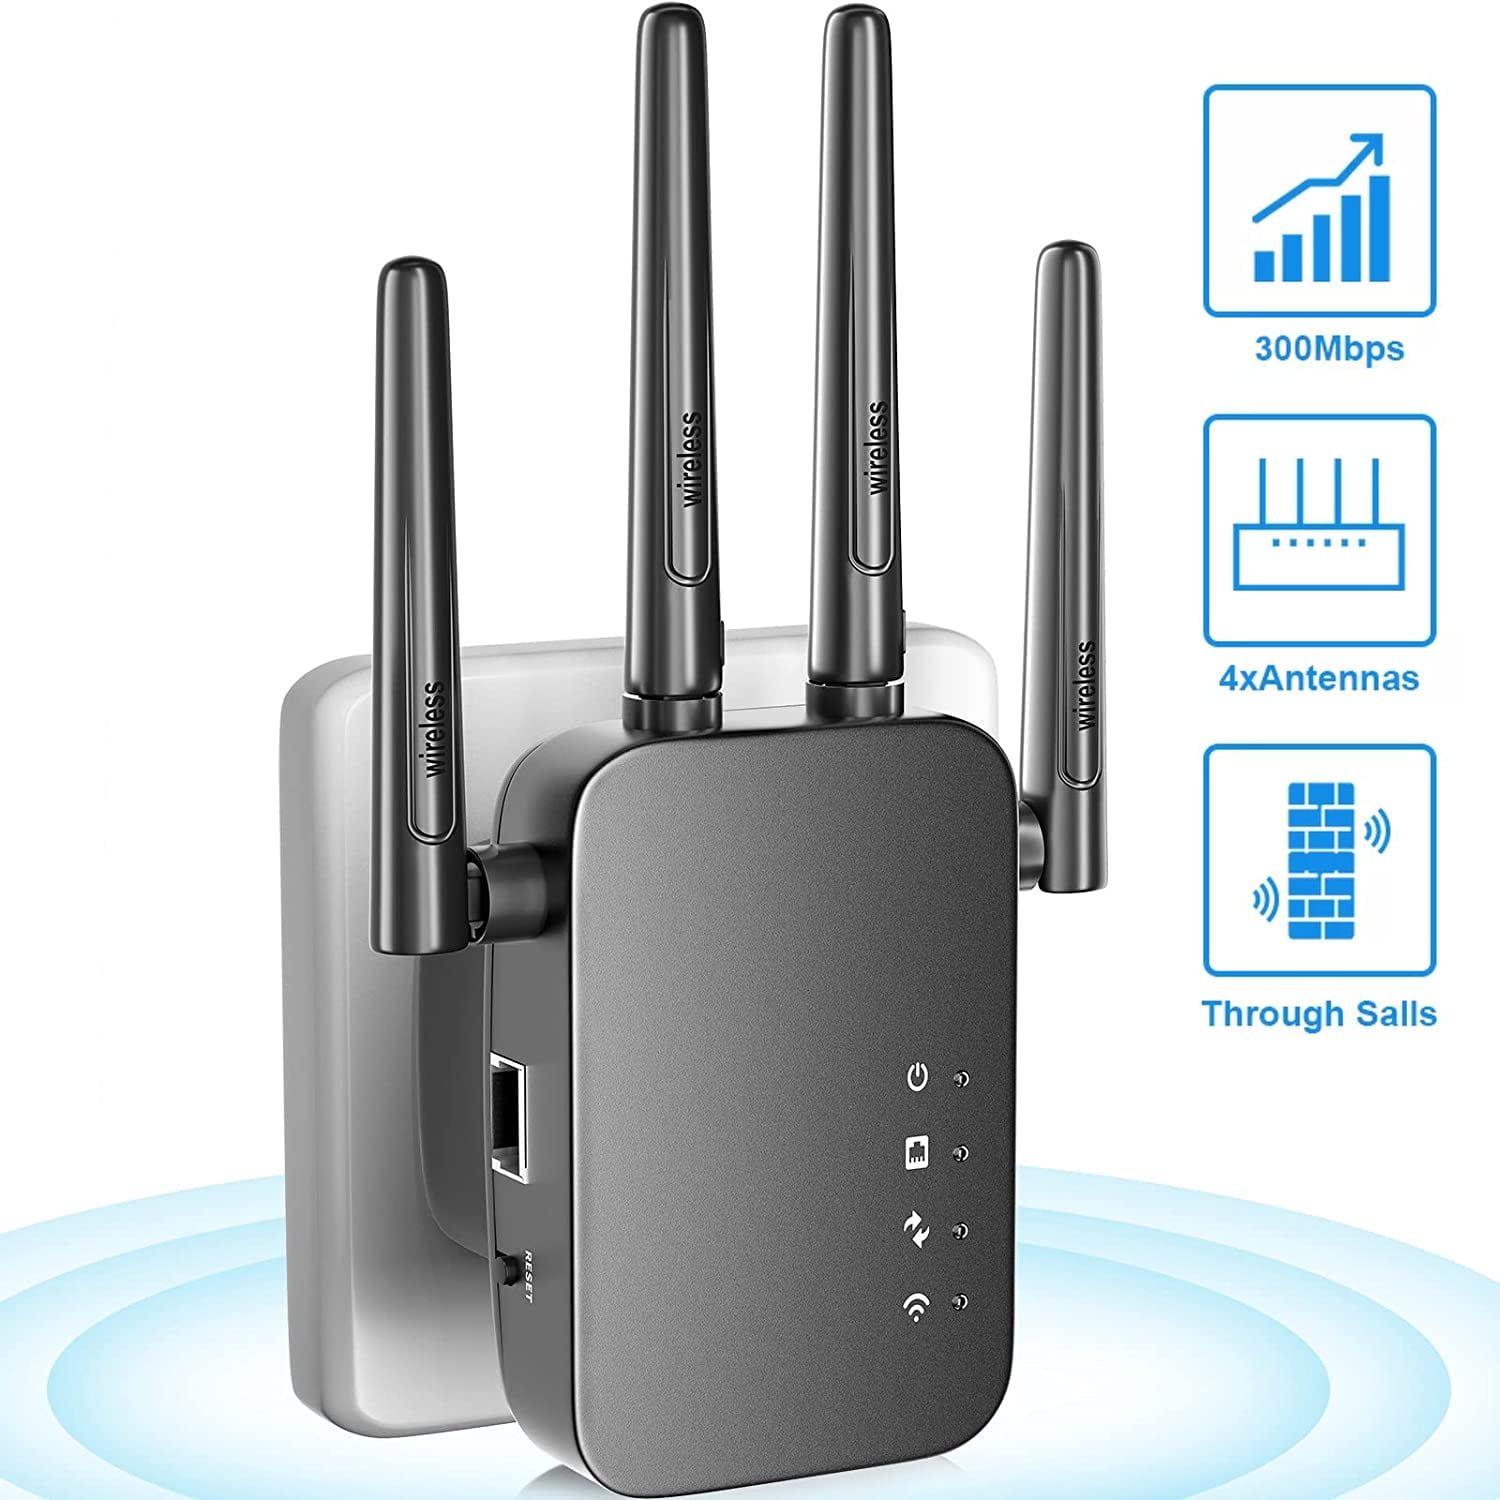 Super Boost WiFi Booster Boost WiFi Signal, Range Extender, Repeater,  Access Point - Buy Super Boost WiFi Booster Boost WiFi Signal, Range  Extender